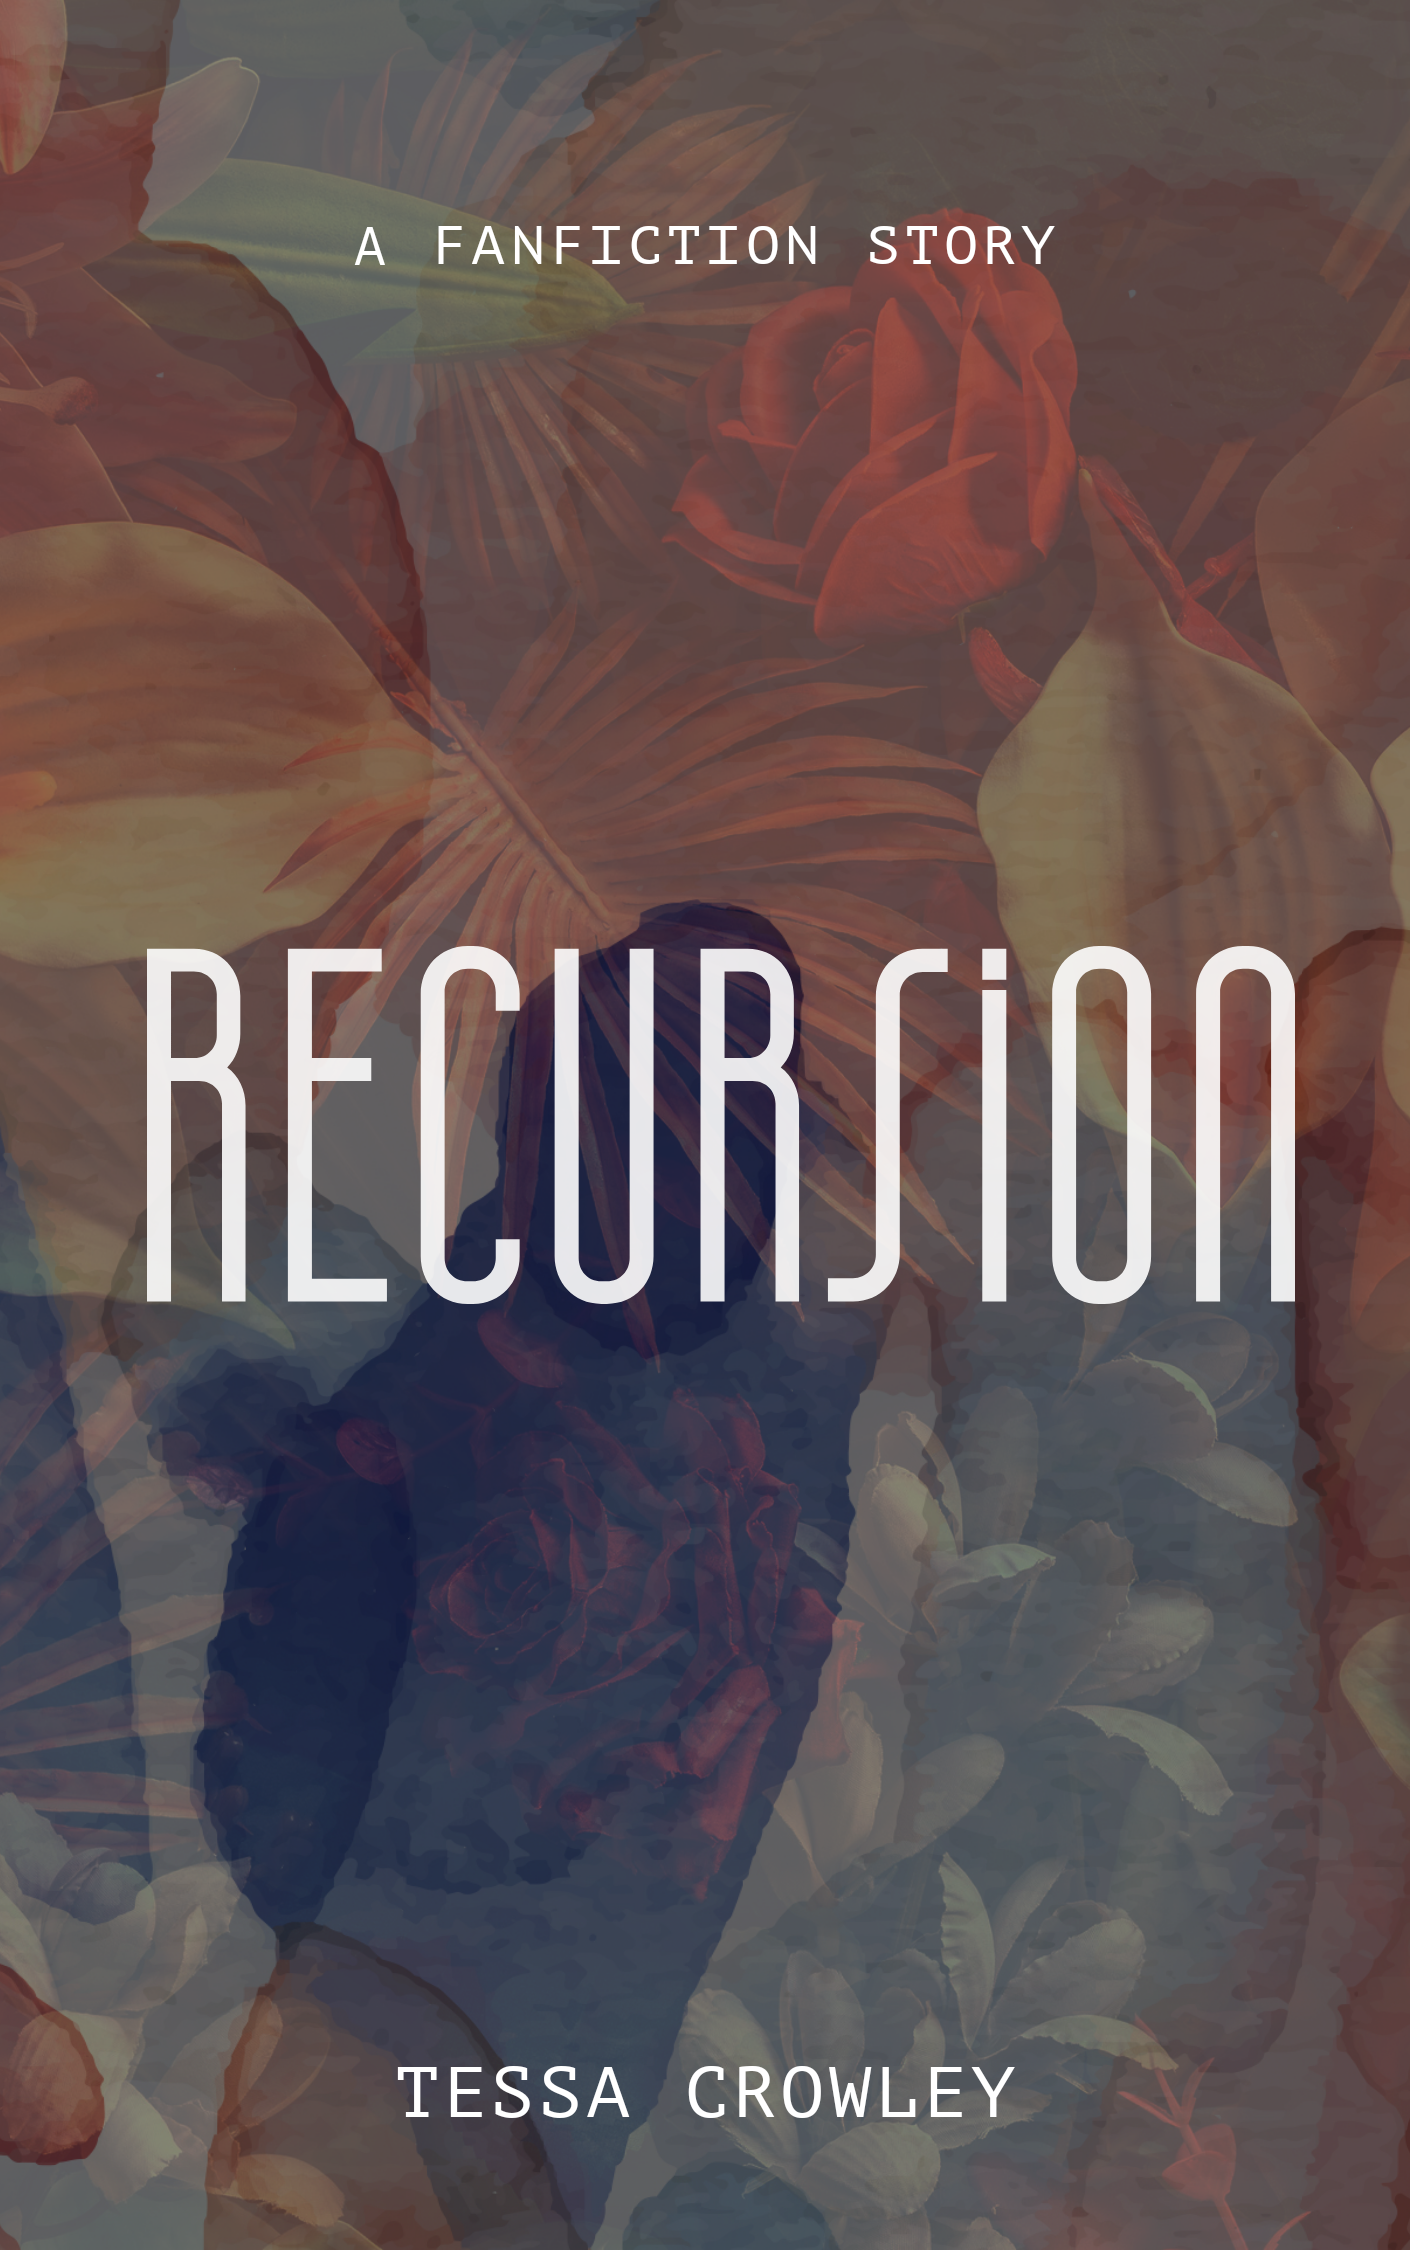 Fan cover of Recursion by Tessa Crowley. Background is some faded red flowers and leaves